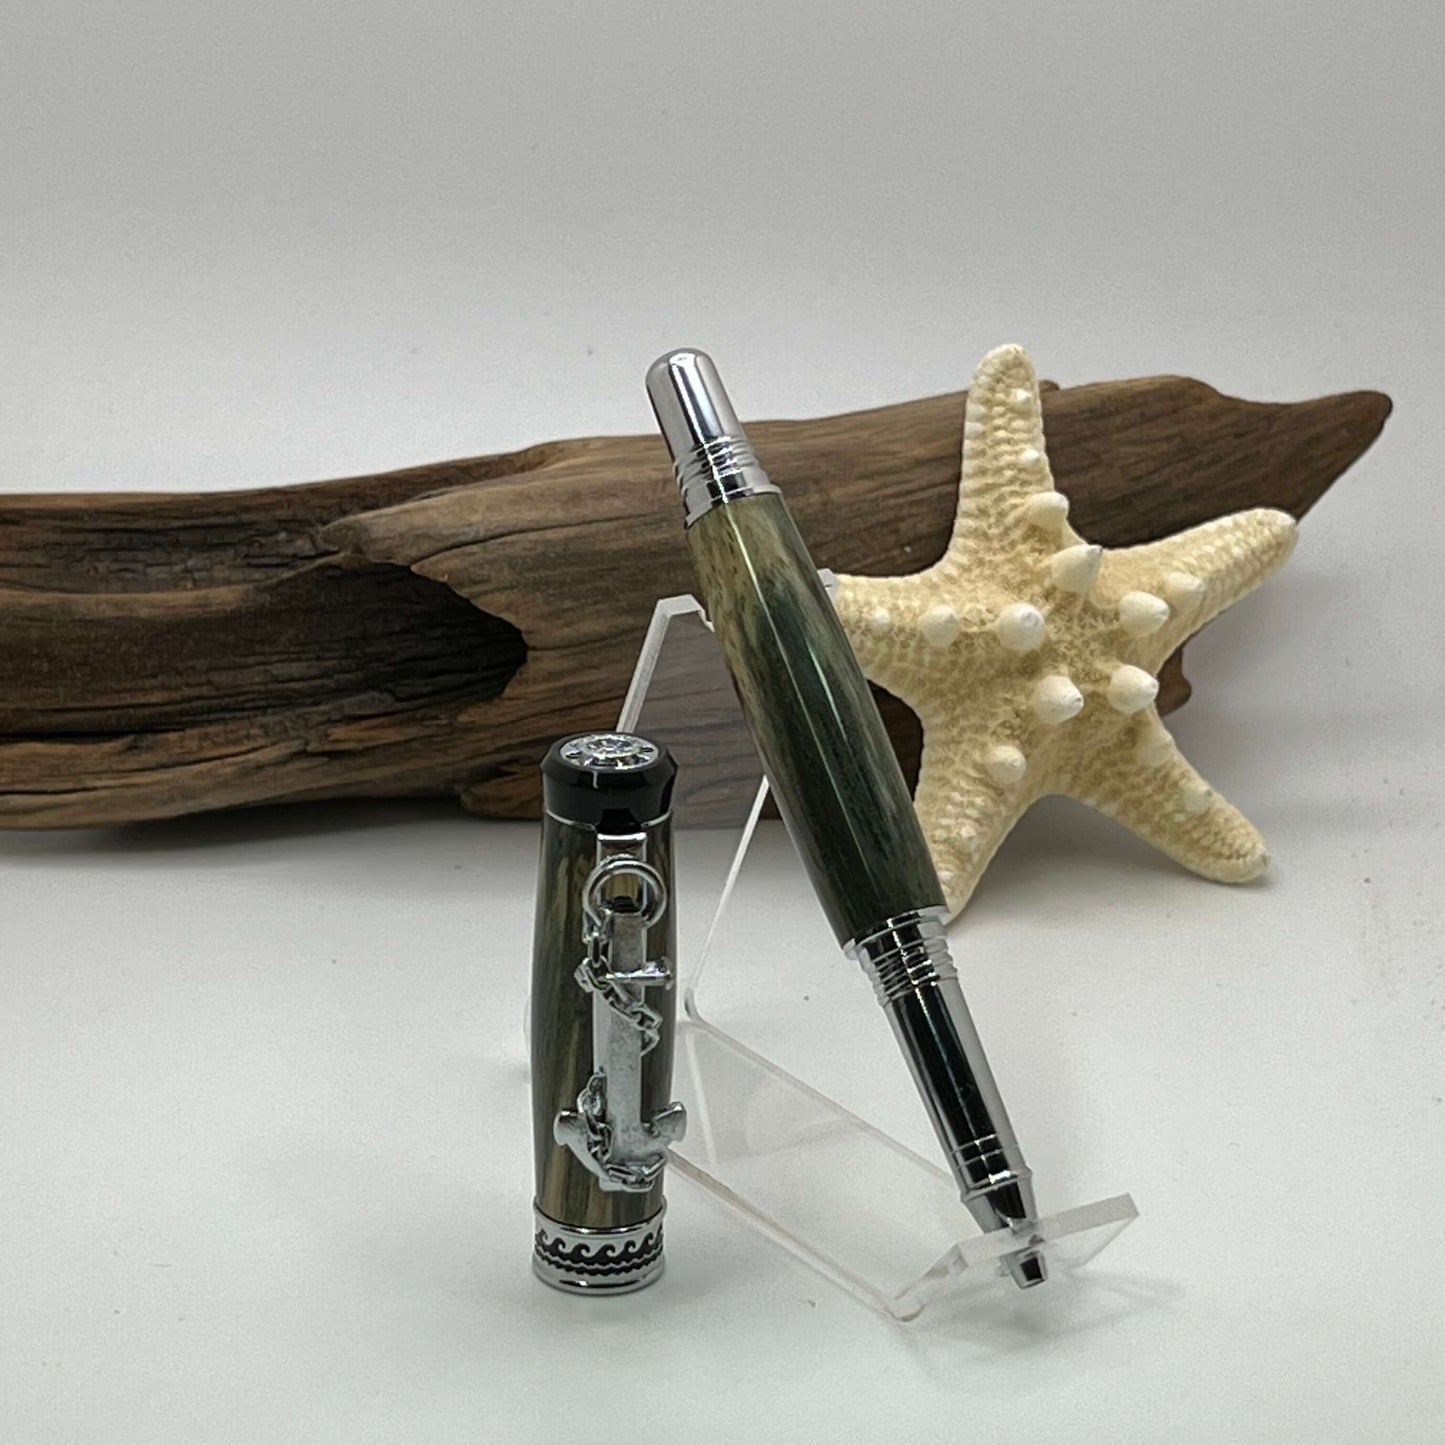 The Pamlico Voyager Rollerball Pen